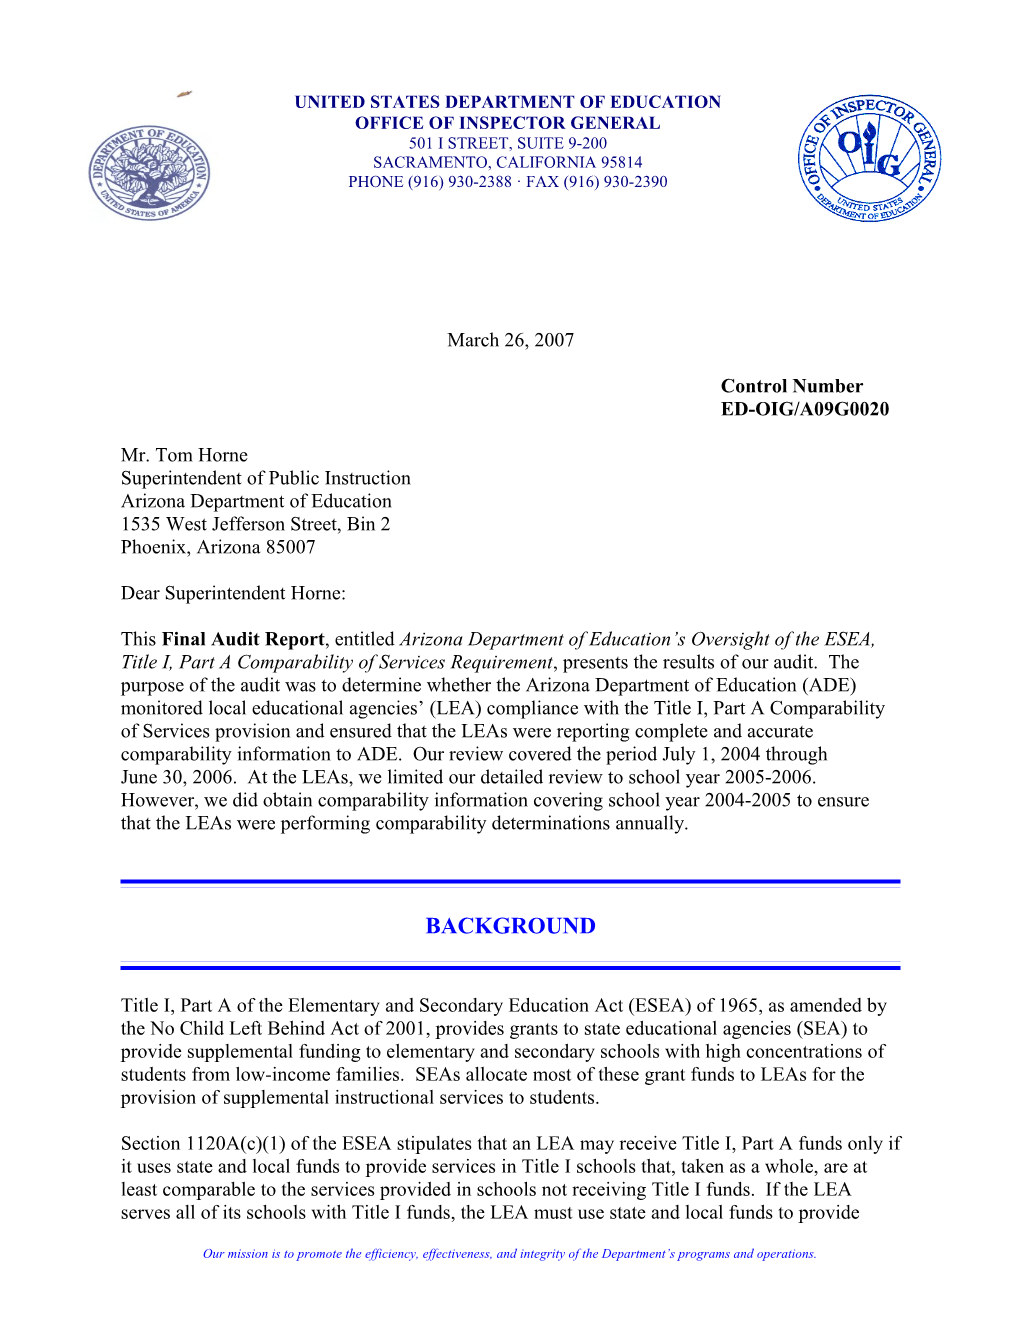 OIG Audit Report: Arizona Department of Education S Oversight of the ESEA, Title I, Part